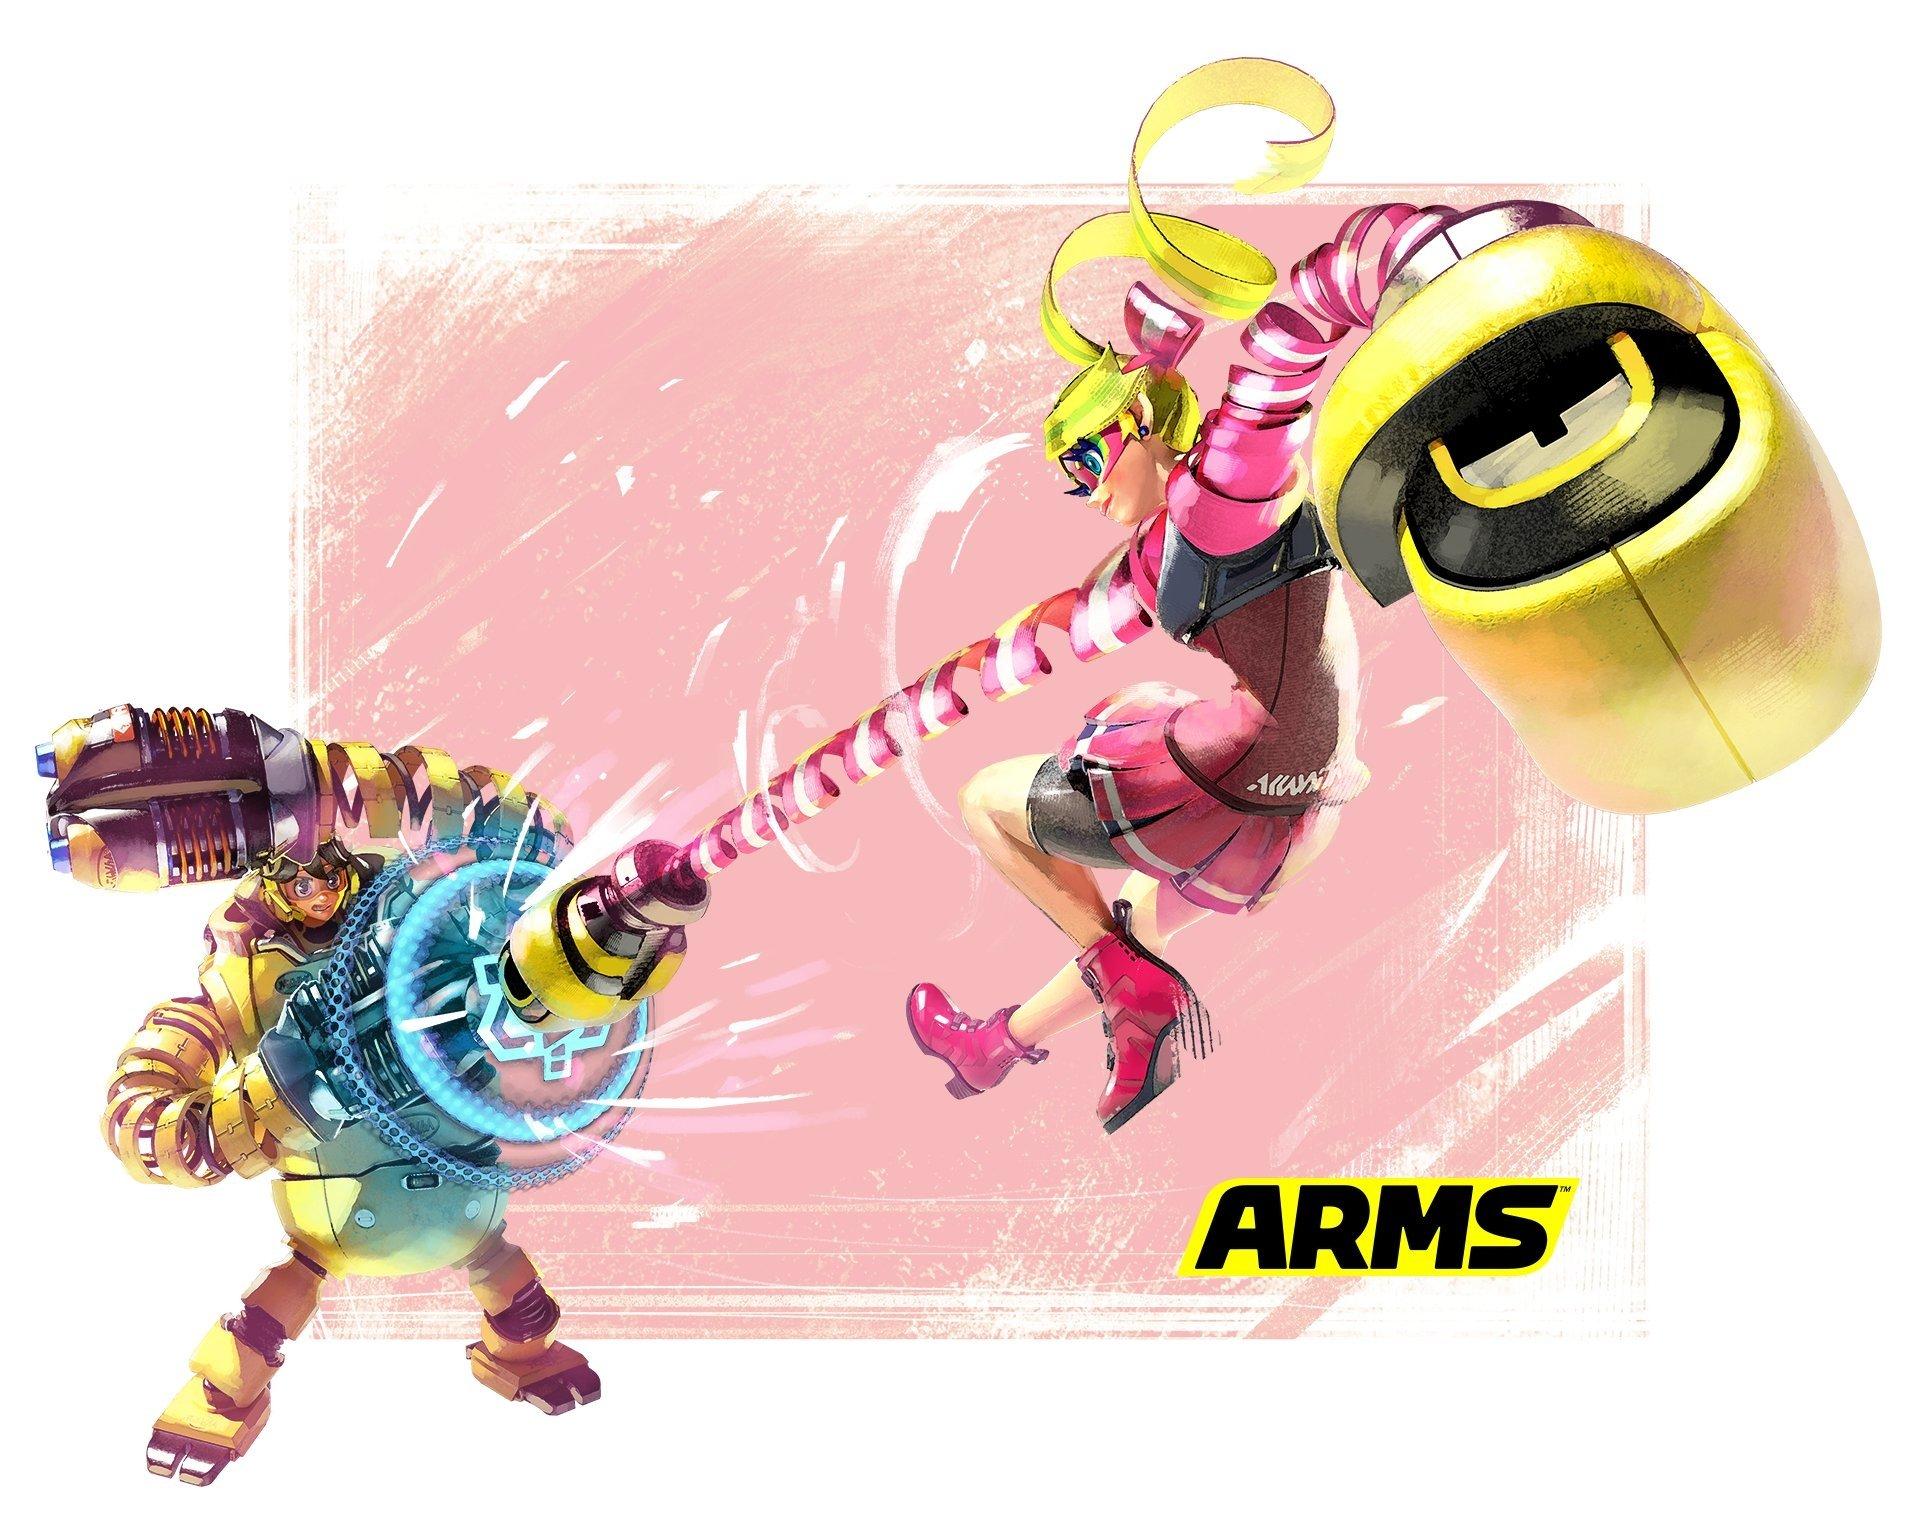 Arms HD Wallpaper and Background Image